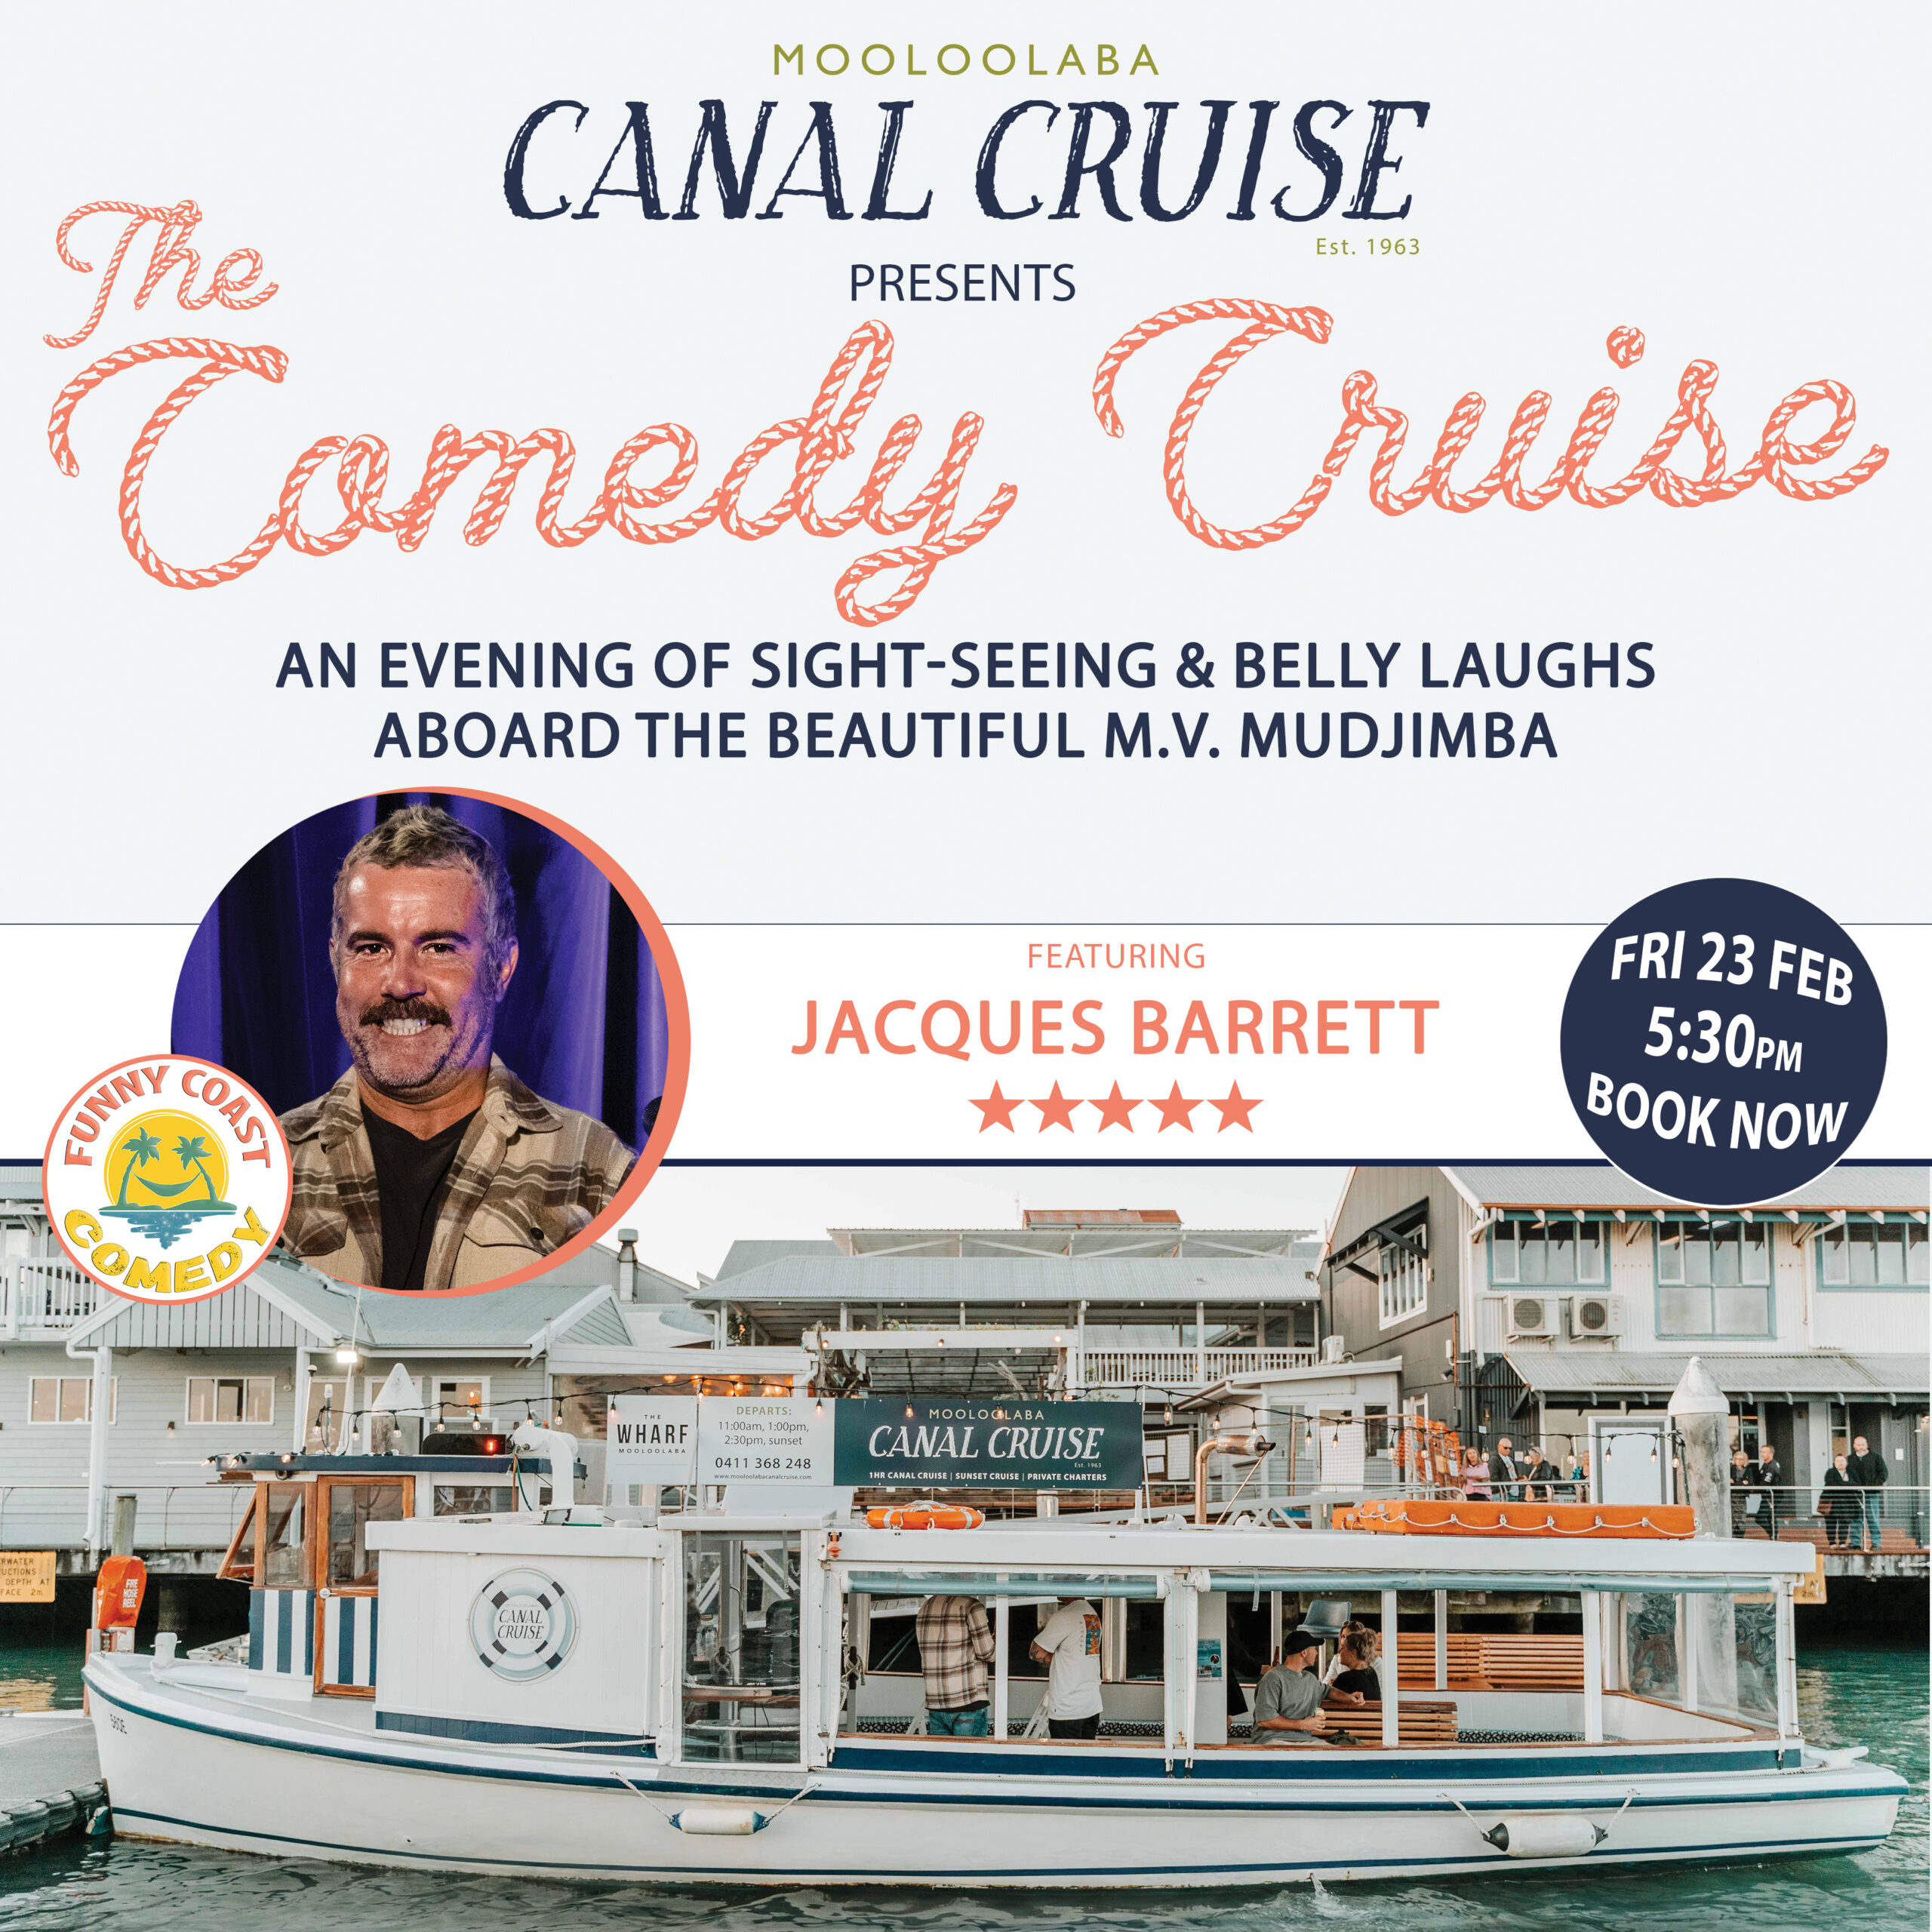 Mooloolaba Canal Cruise and Funny Coast Comedy - Stand Up Comedy Cruise November 2023